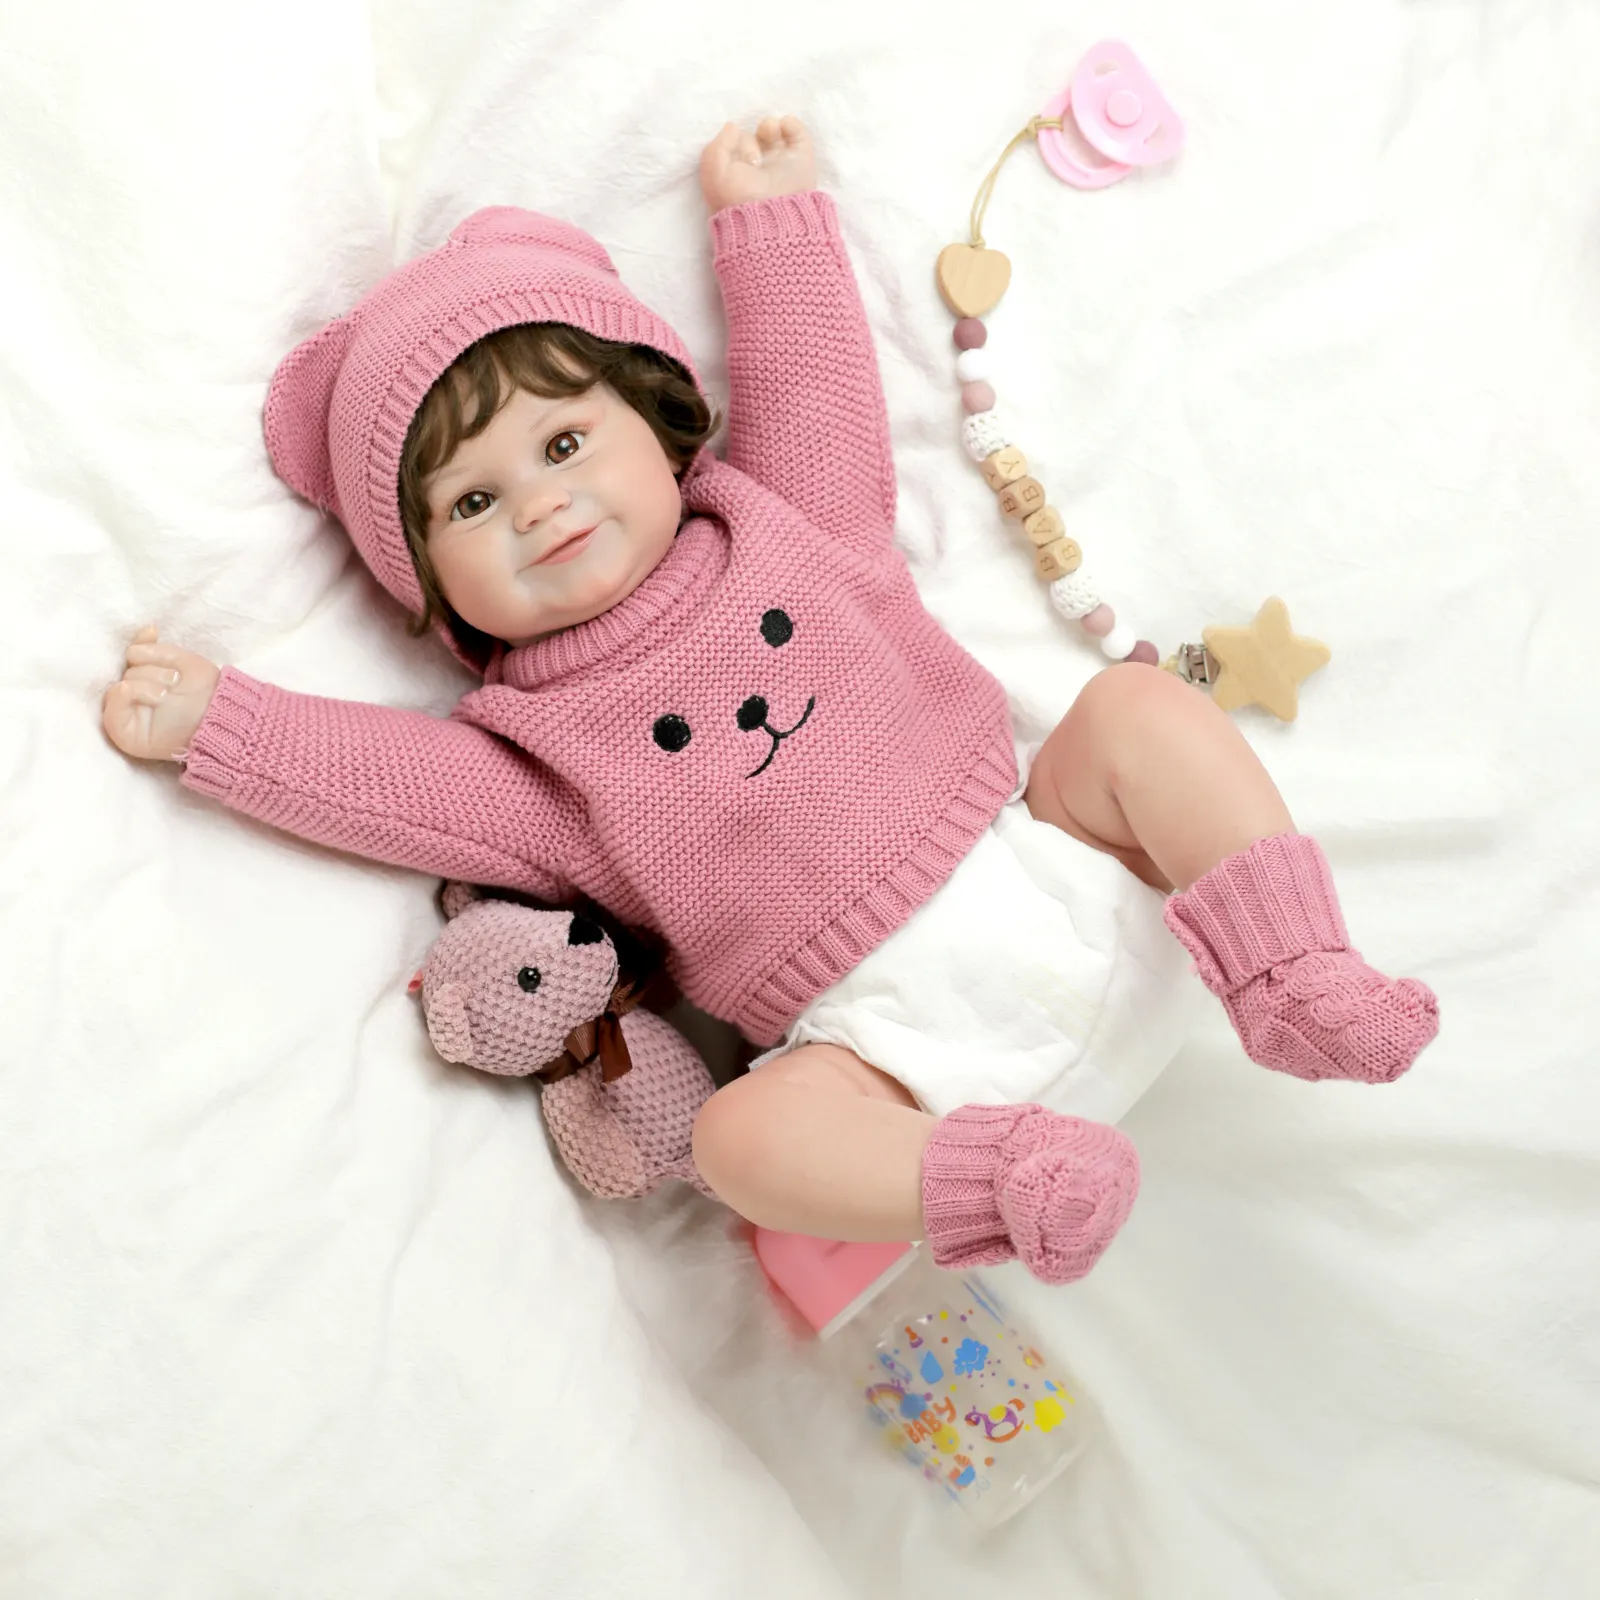 New Hot Products 23 Inch Baby Dolls Baby Kids Gifts High Quality Read Handmade Silicone Reborn Dolls